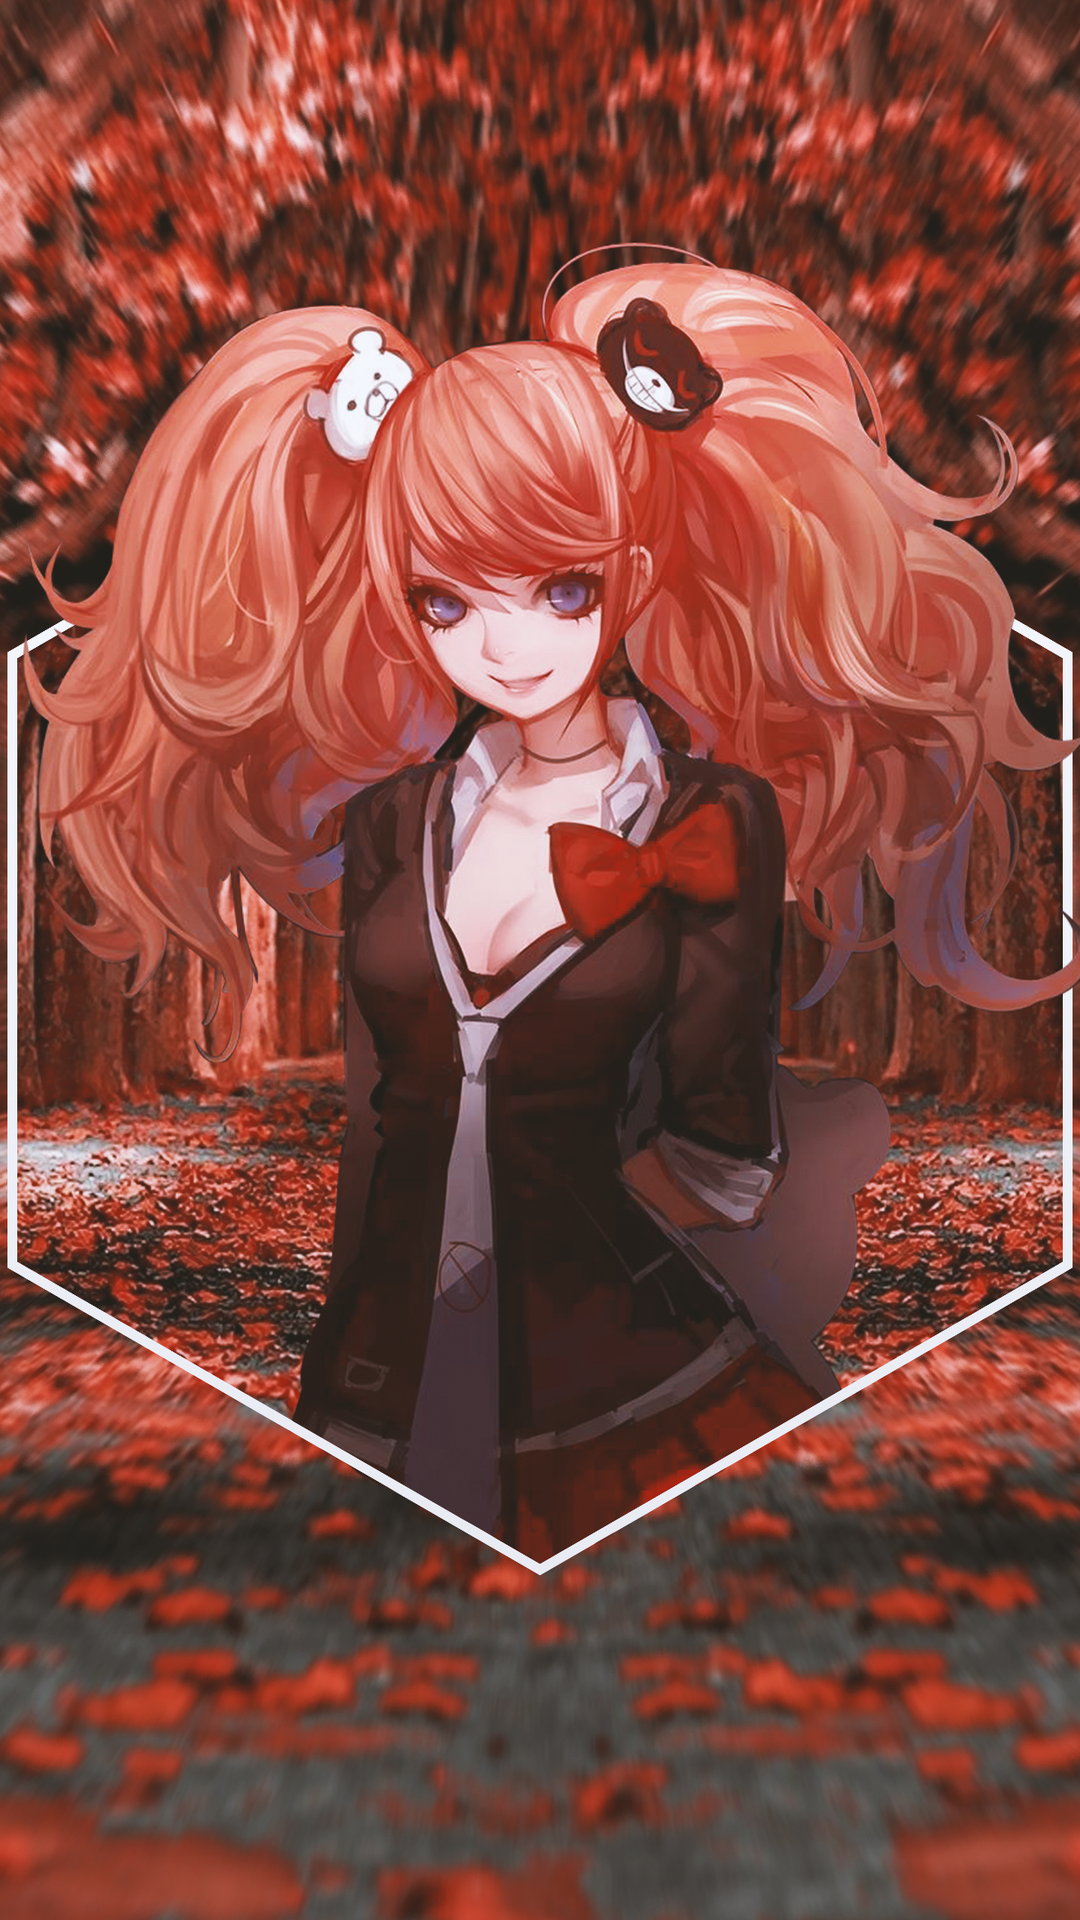 Mobile wallpaper Anime Blonde Twintails Danganronpa Junko Enoshima  1129606 download the picture for free